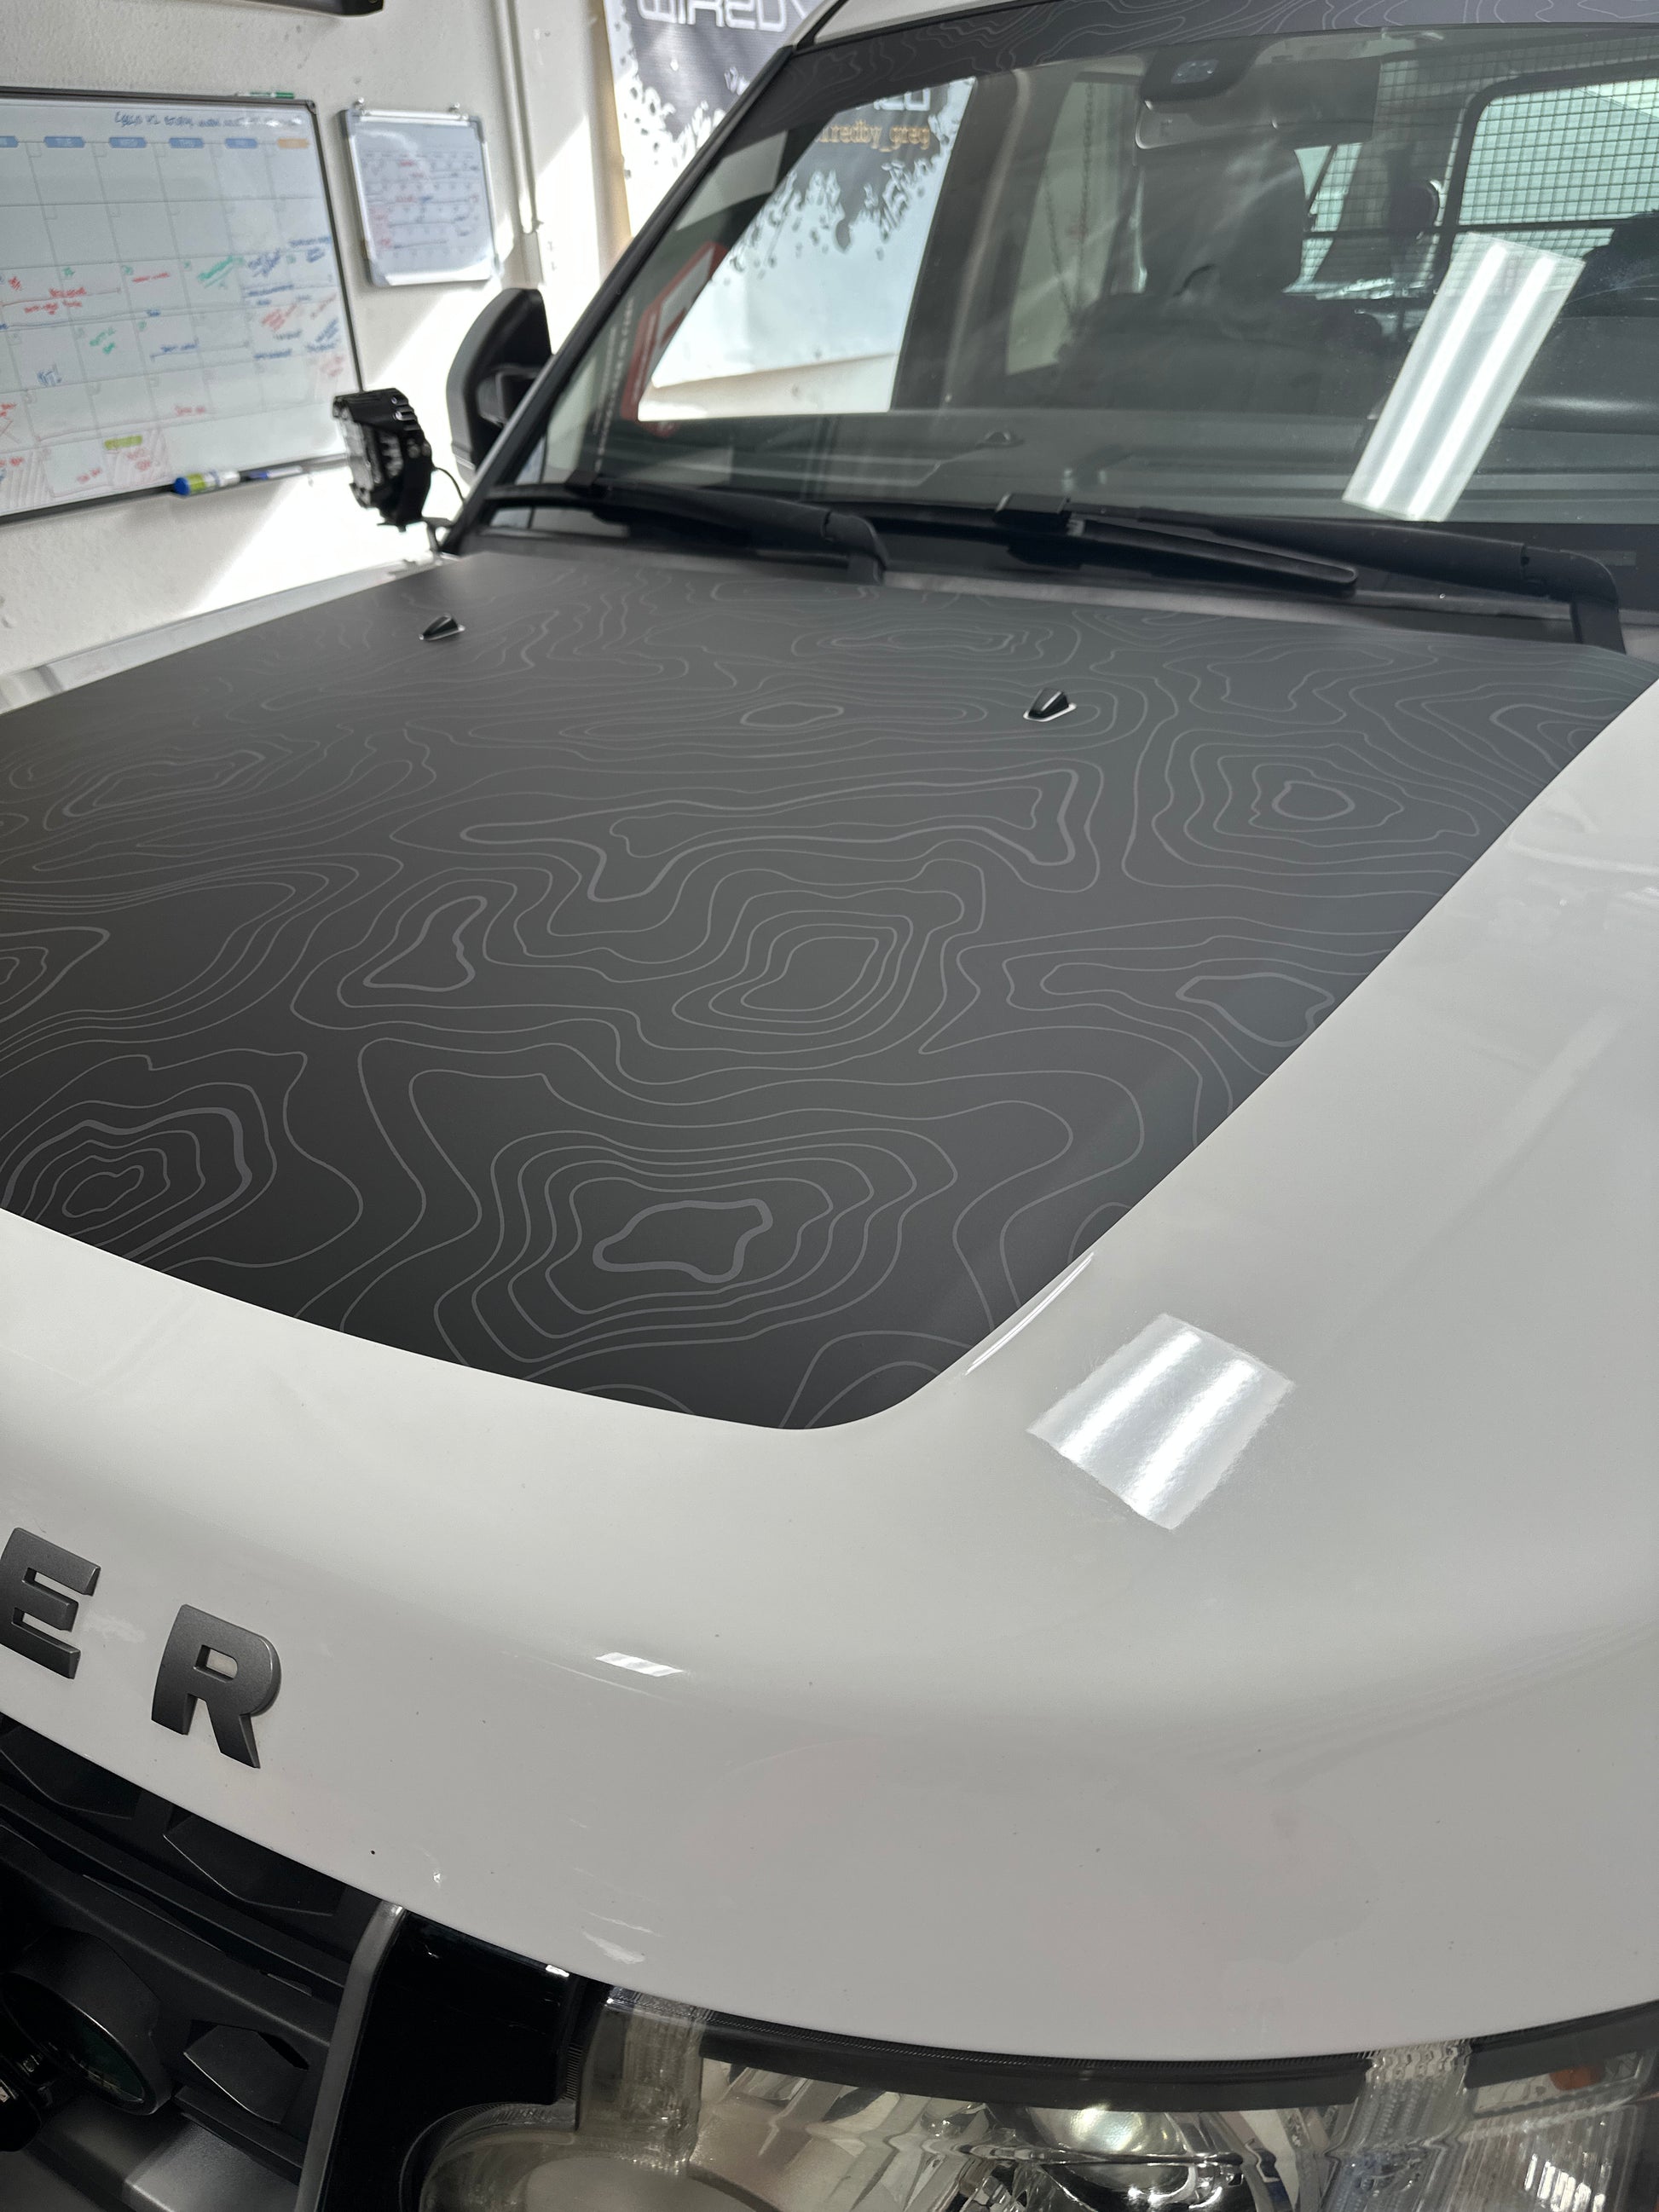 Landrover Discovery Bonnet